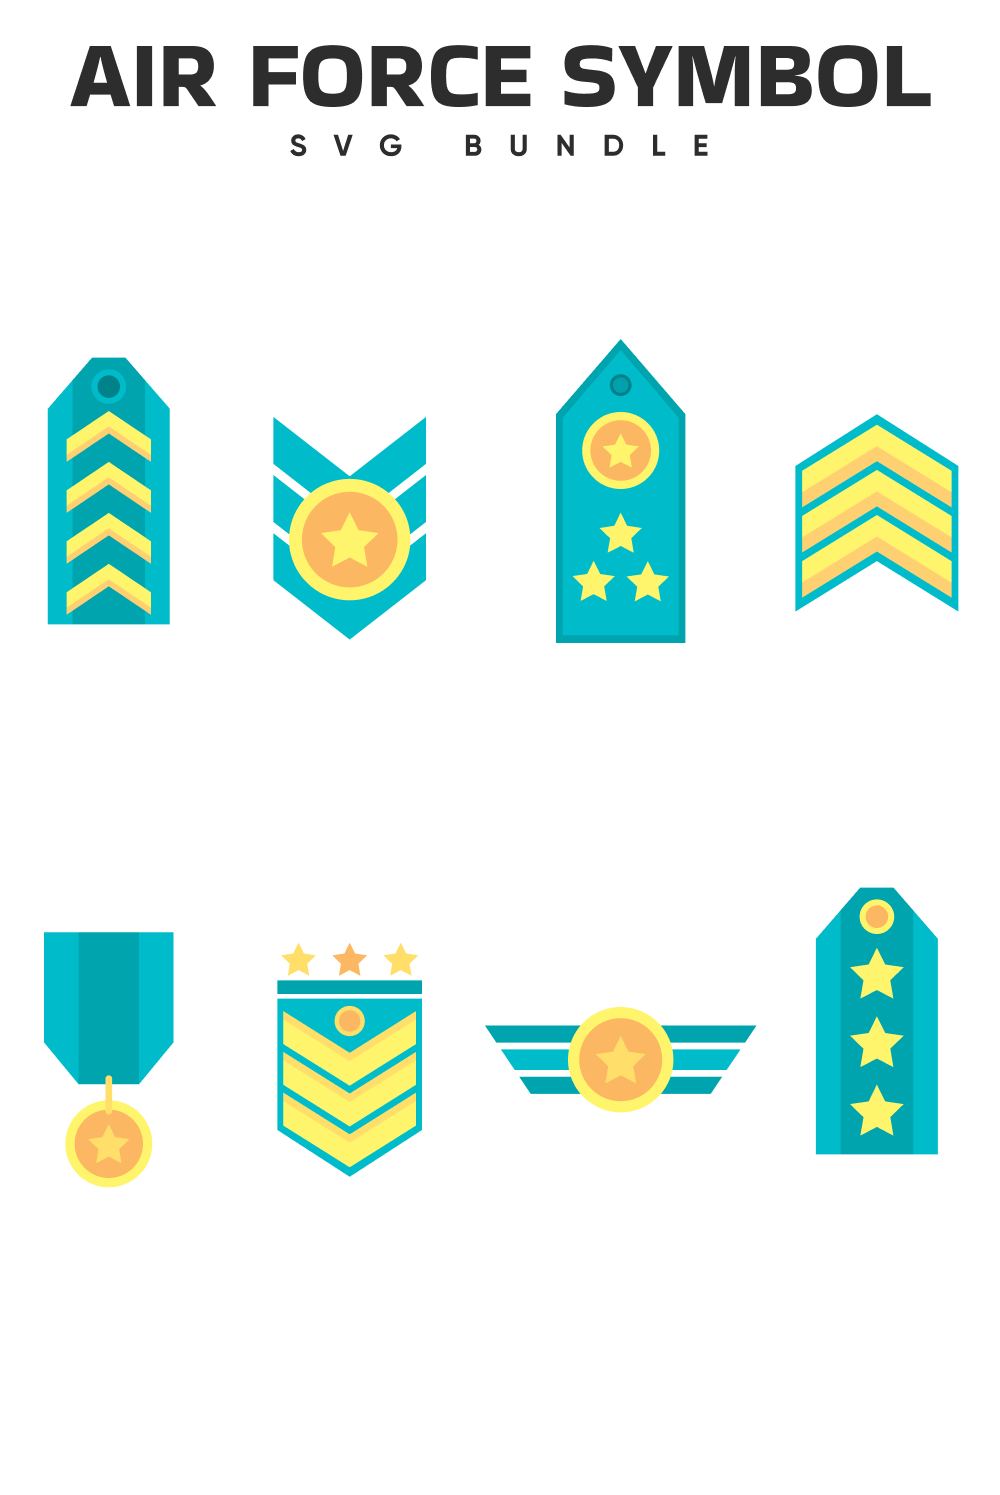 Awards for America's Air Force.